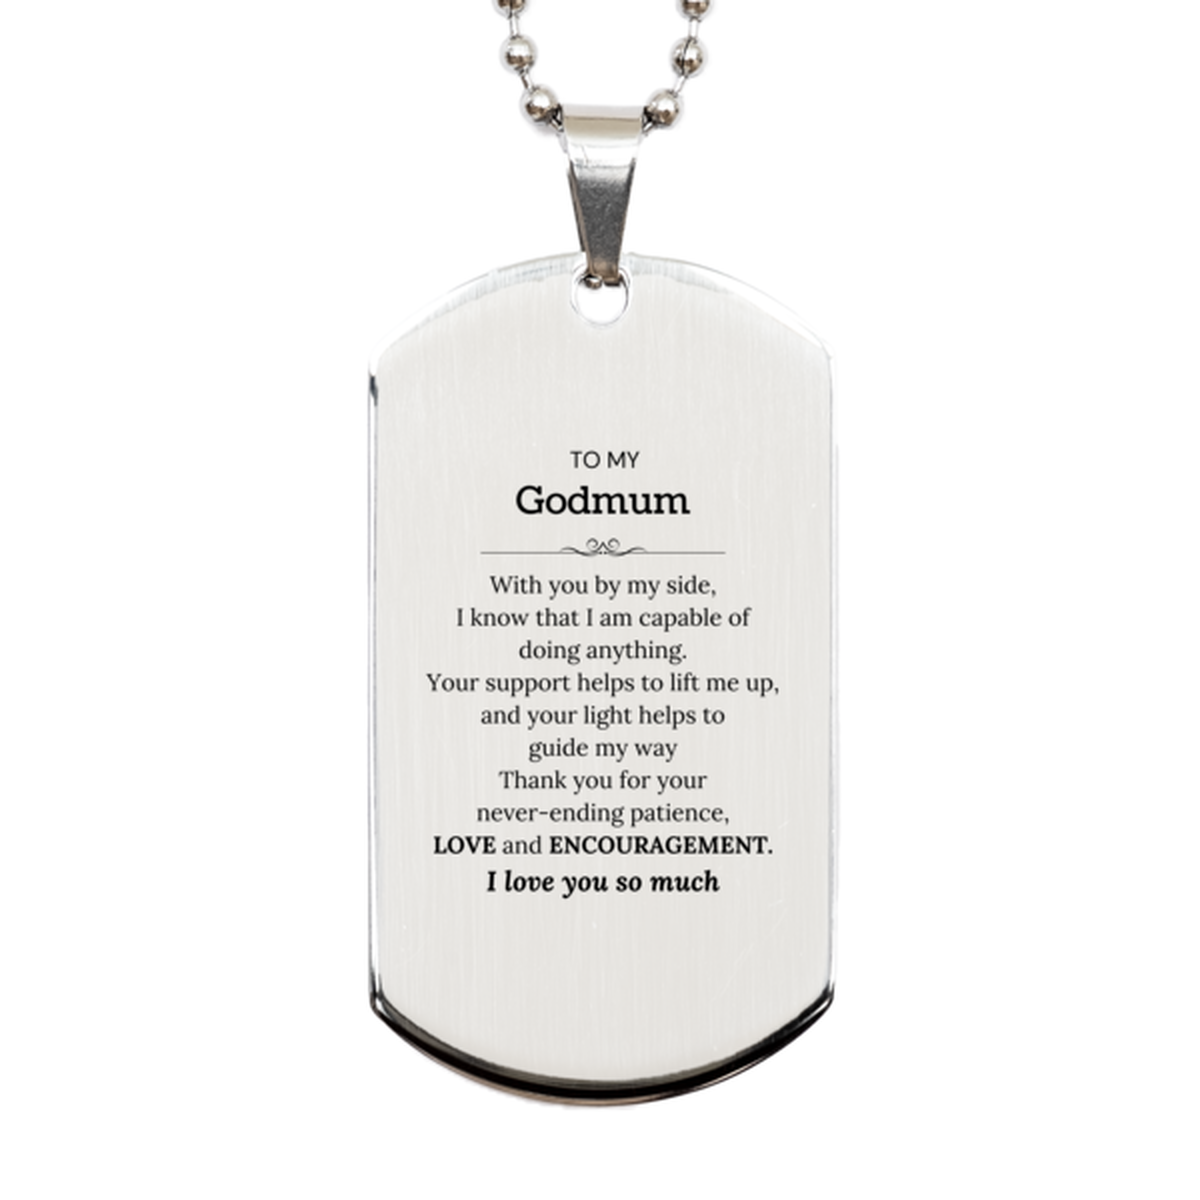 Appreciation Godmum Silver Dog Tag Gifts, To My Godmum Birthday Christmas Wedding Keepsake Gifts for Godmum With you by my side, I know that I am capable of doing anything. I love you so much